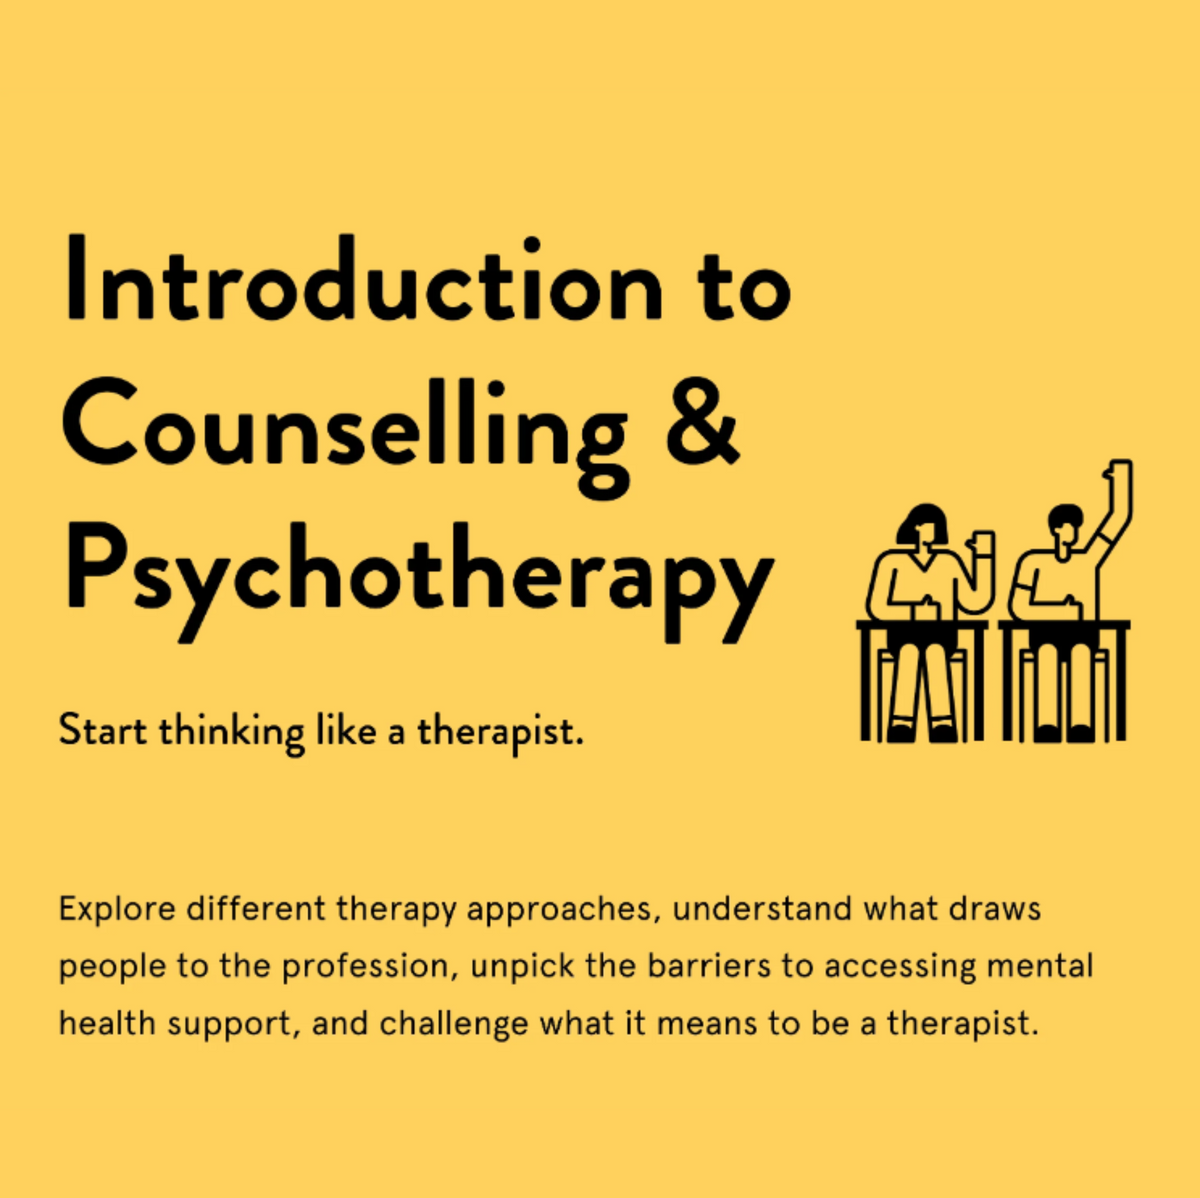 Introduction to Counselling & Psychotherapy Short Course (November)